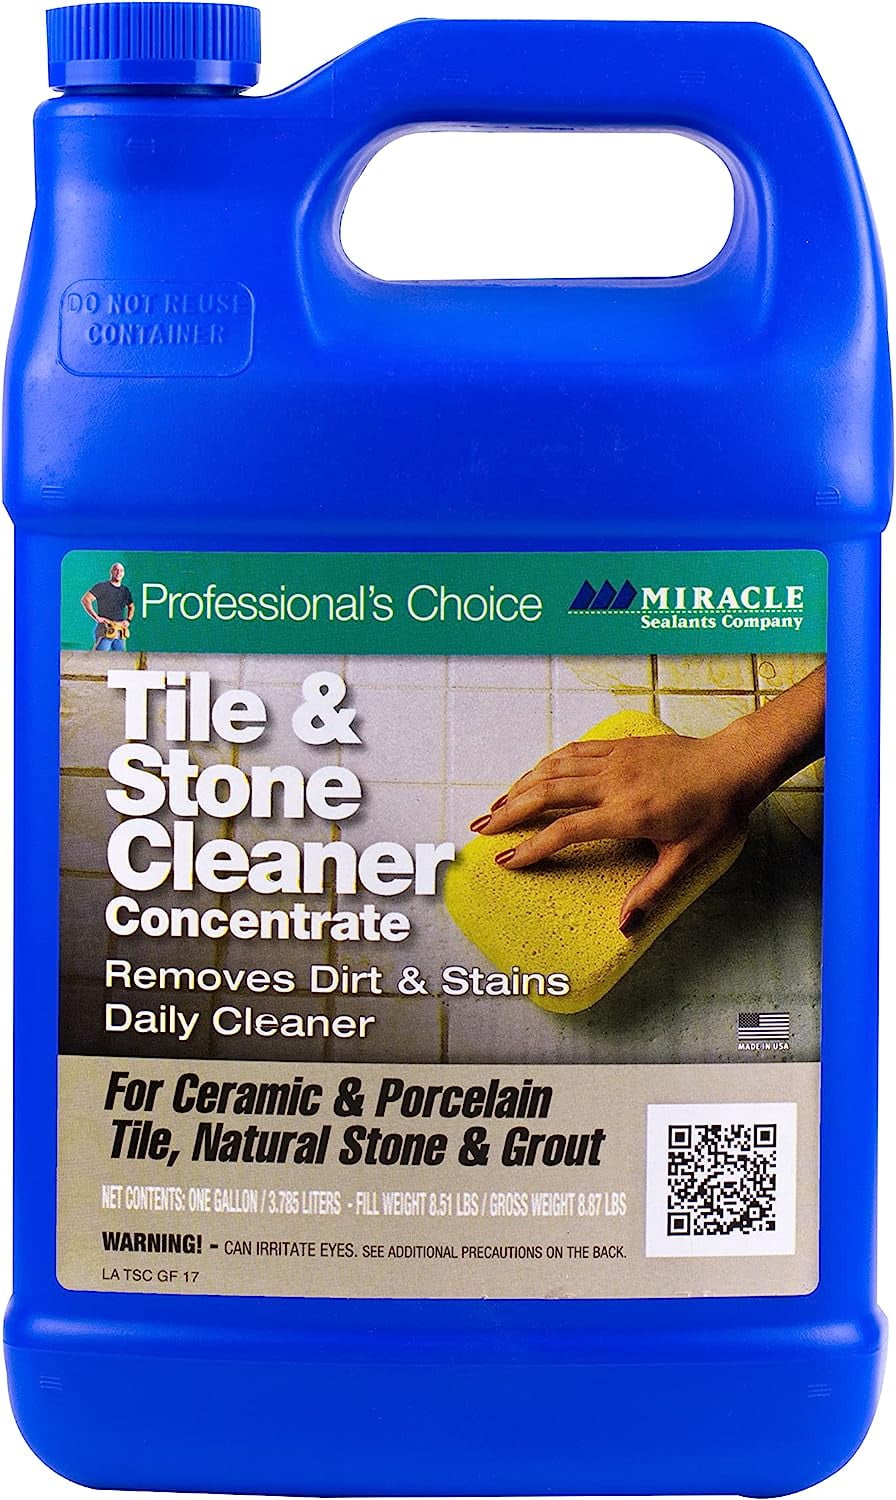  Zep Grout Cleaner and Brightener - 32 oz (Case of 12) -  ZU104632 - Deep Cleaning Formula Removes Old Stains From Grout : Health &  Household